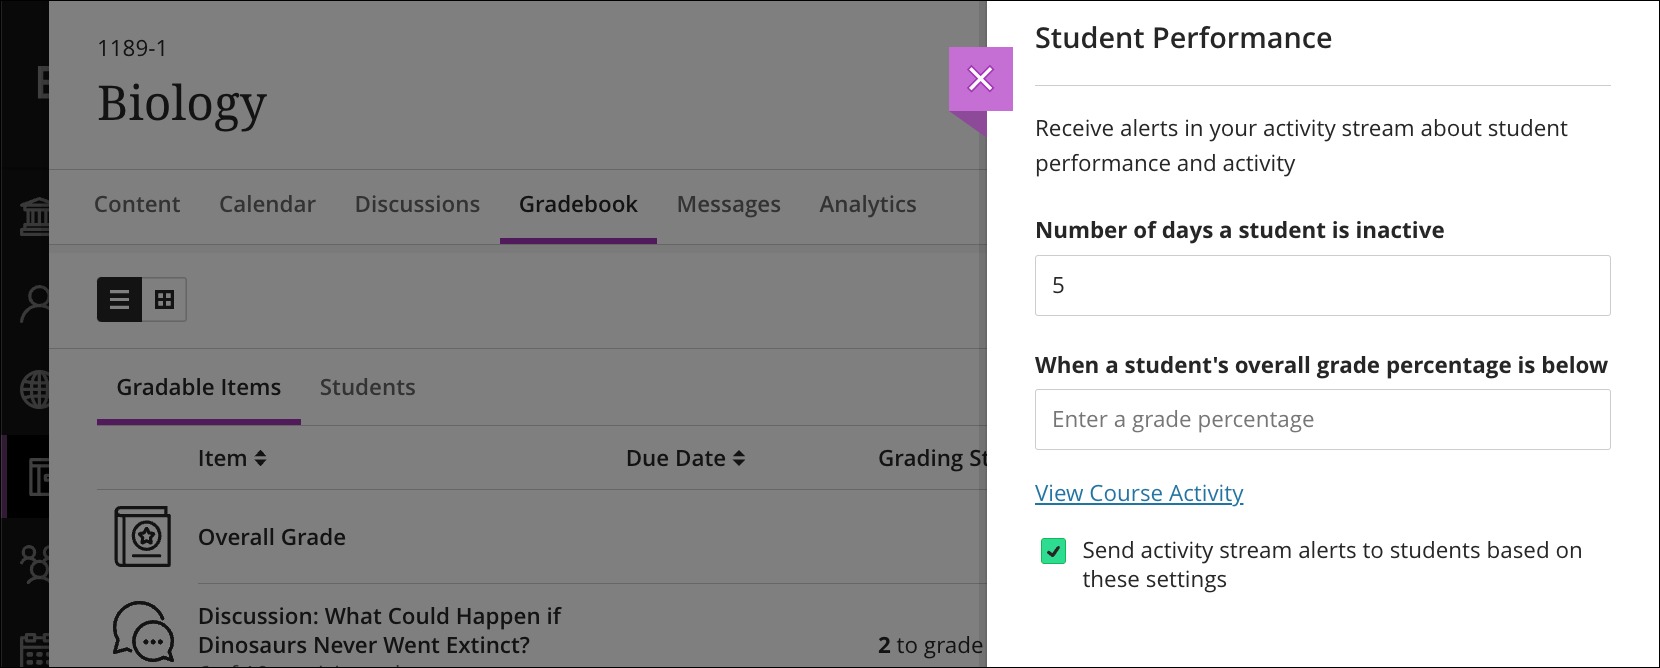 Image of the Performance Alerts section of the Gradebook settings, showing the option to change number of days of inactivity and overall grade percentage.